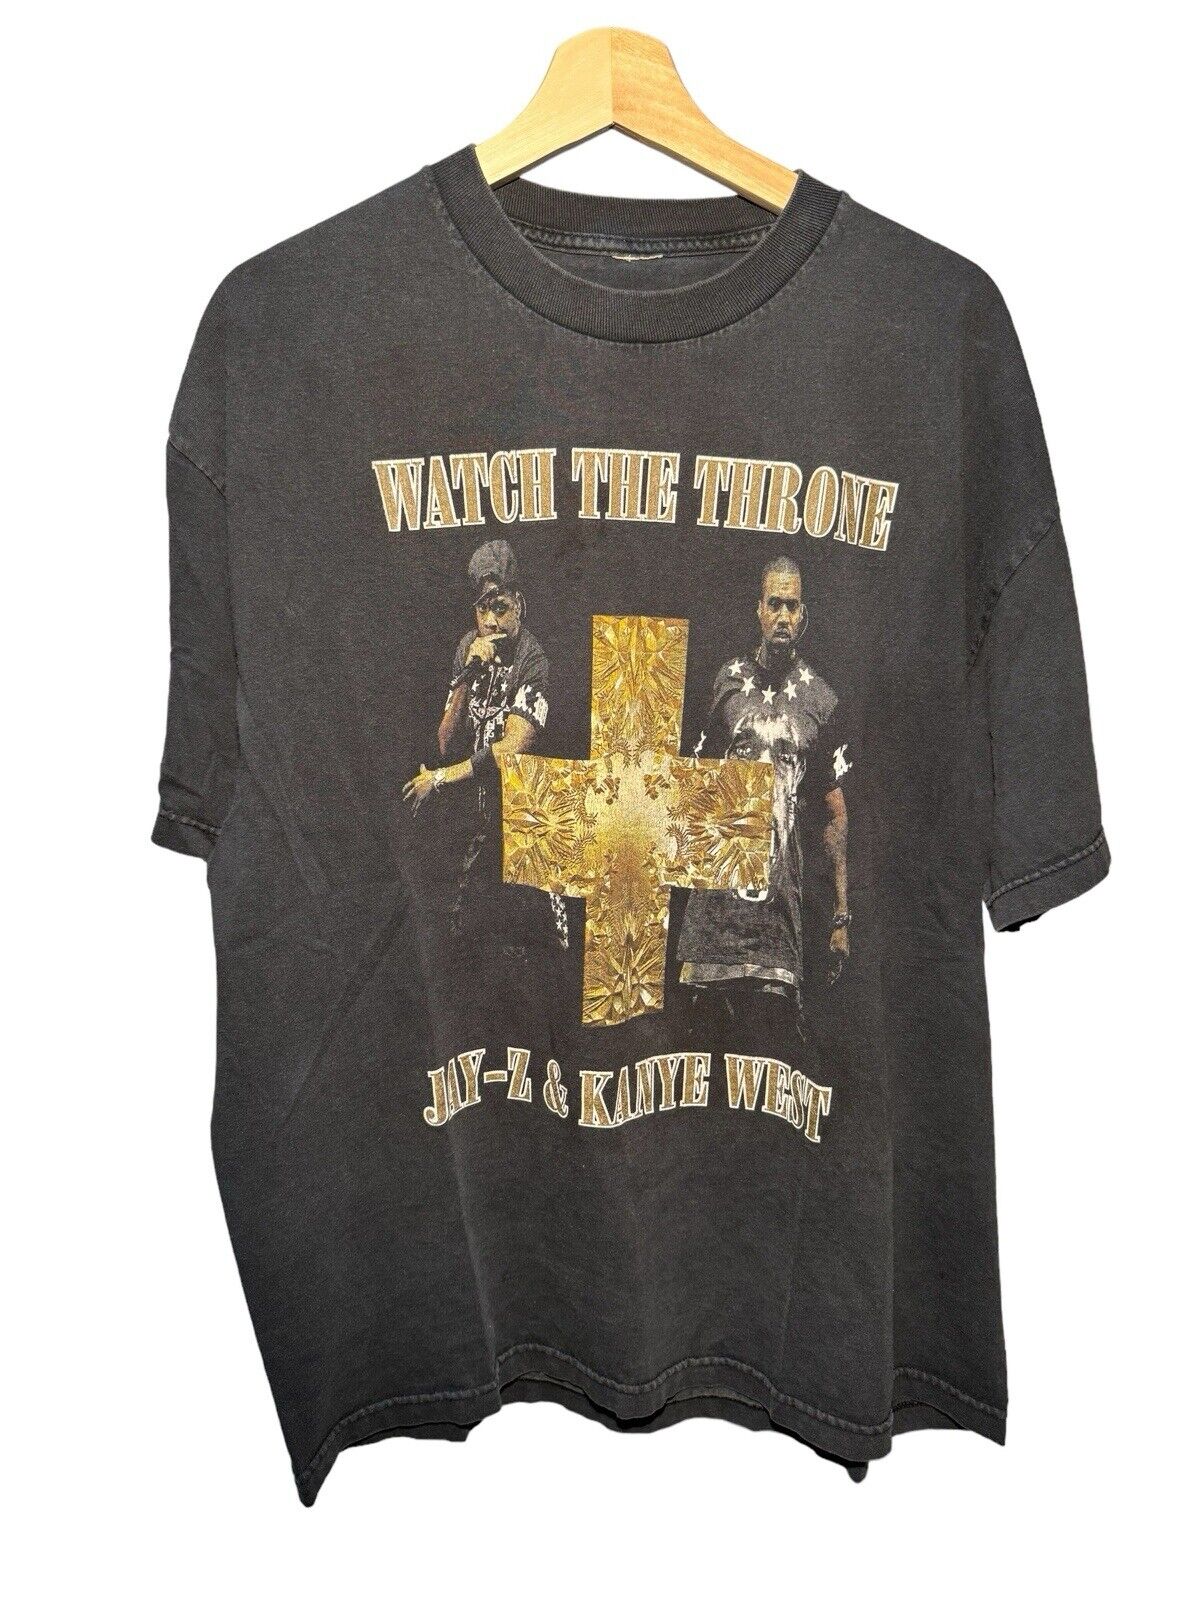 Vintage 2011 Watch The Throne Tour Concert T-Shirt Jay-Z Kanye West  XL  Rare